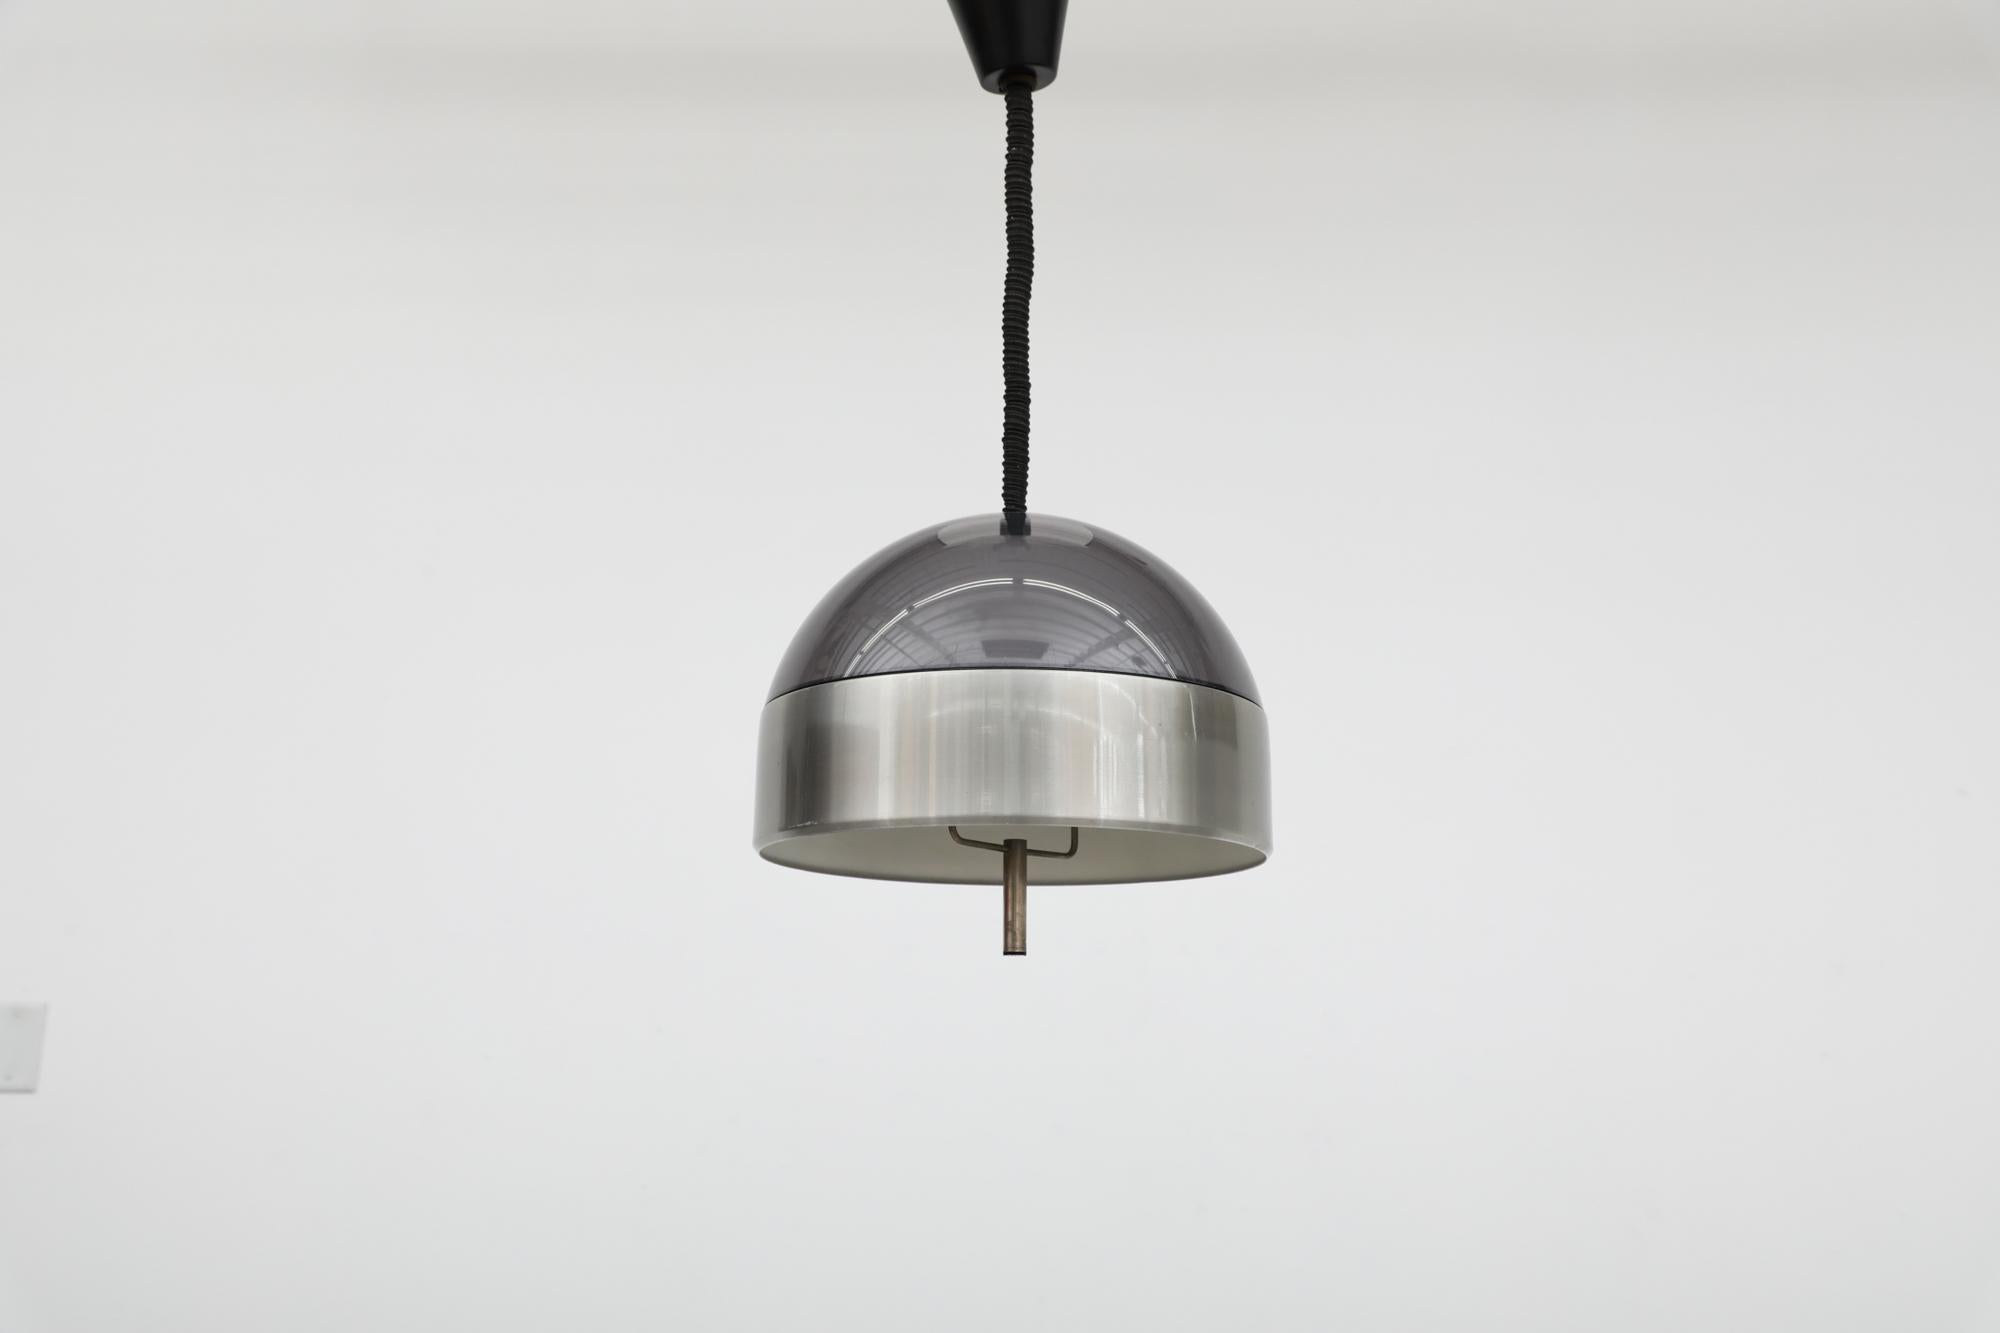 Amazing adjustable height Italian MOD 1970's dome pendant. A smoked plexiglass shell with  brushed aluminum belt and metal handle. In original condition with black canopy and some  wear consistent with age and use.